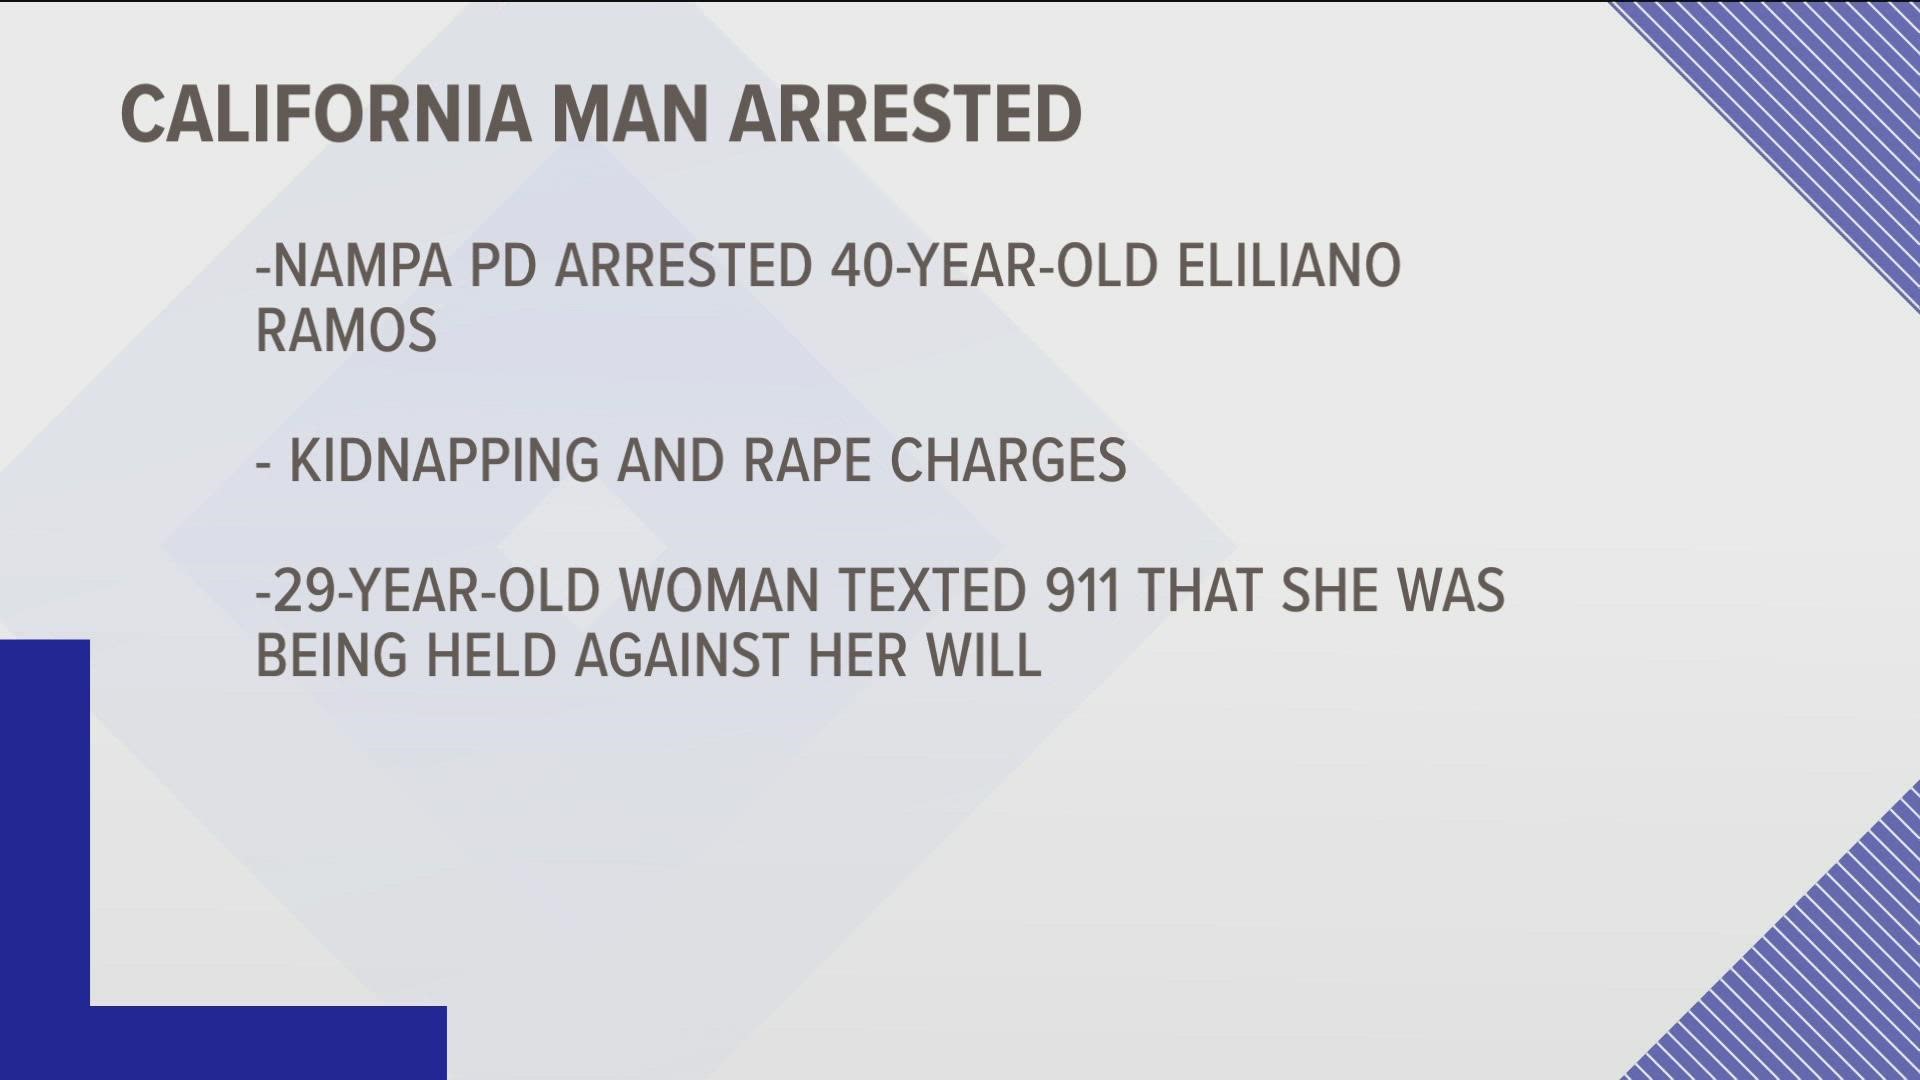 According to Nampa Police, 40-year-old Eliliano Ramos was arrested after a 29-year-old woman sent a text-to-911 message saying she was being held against her will.